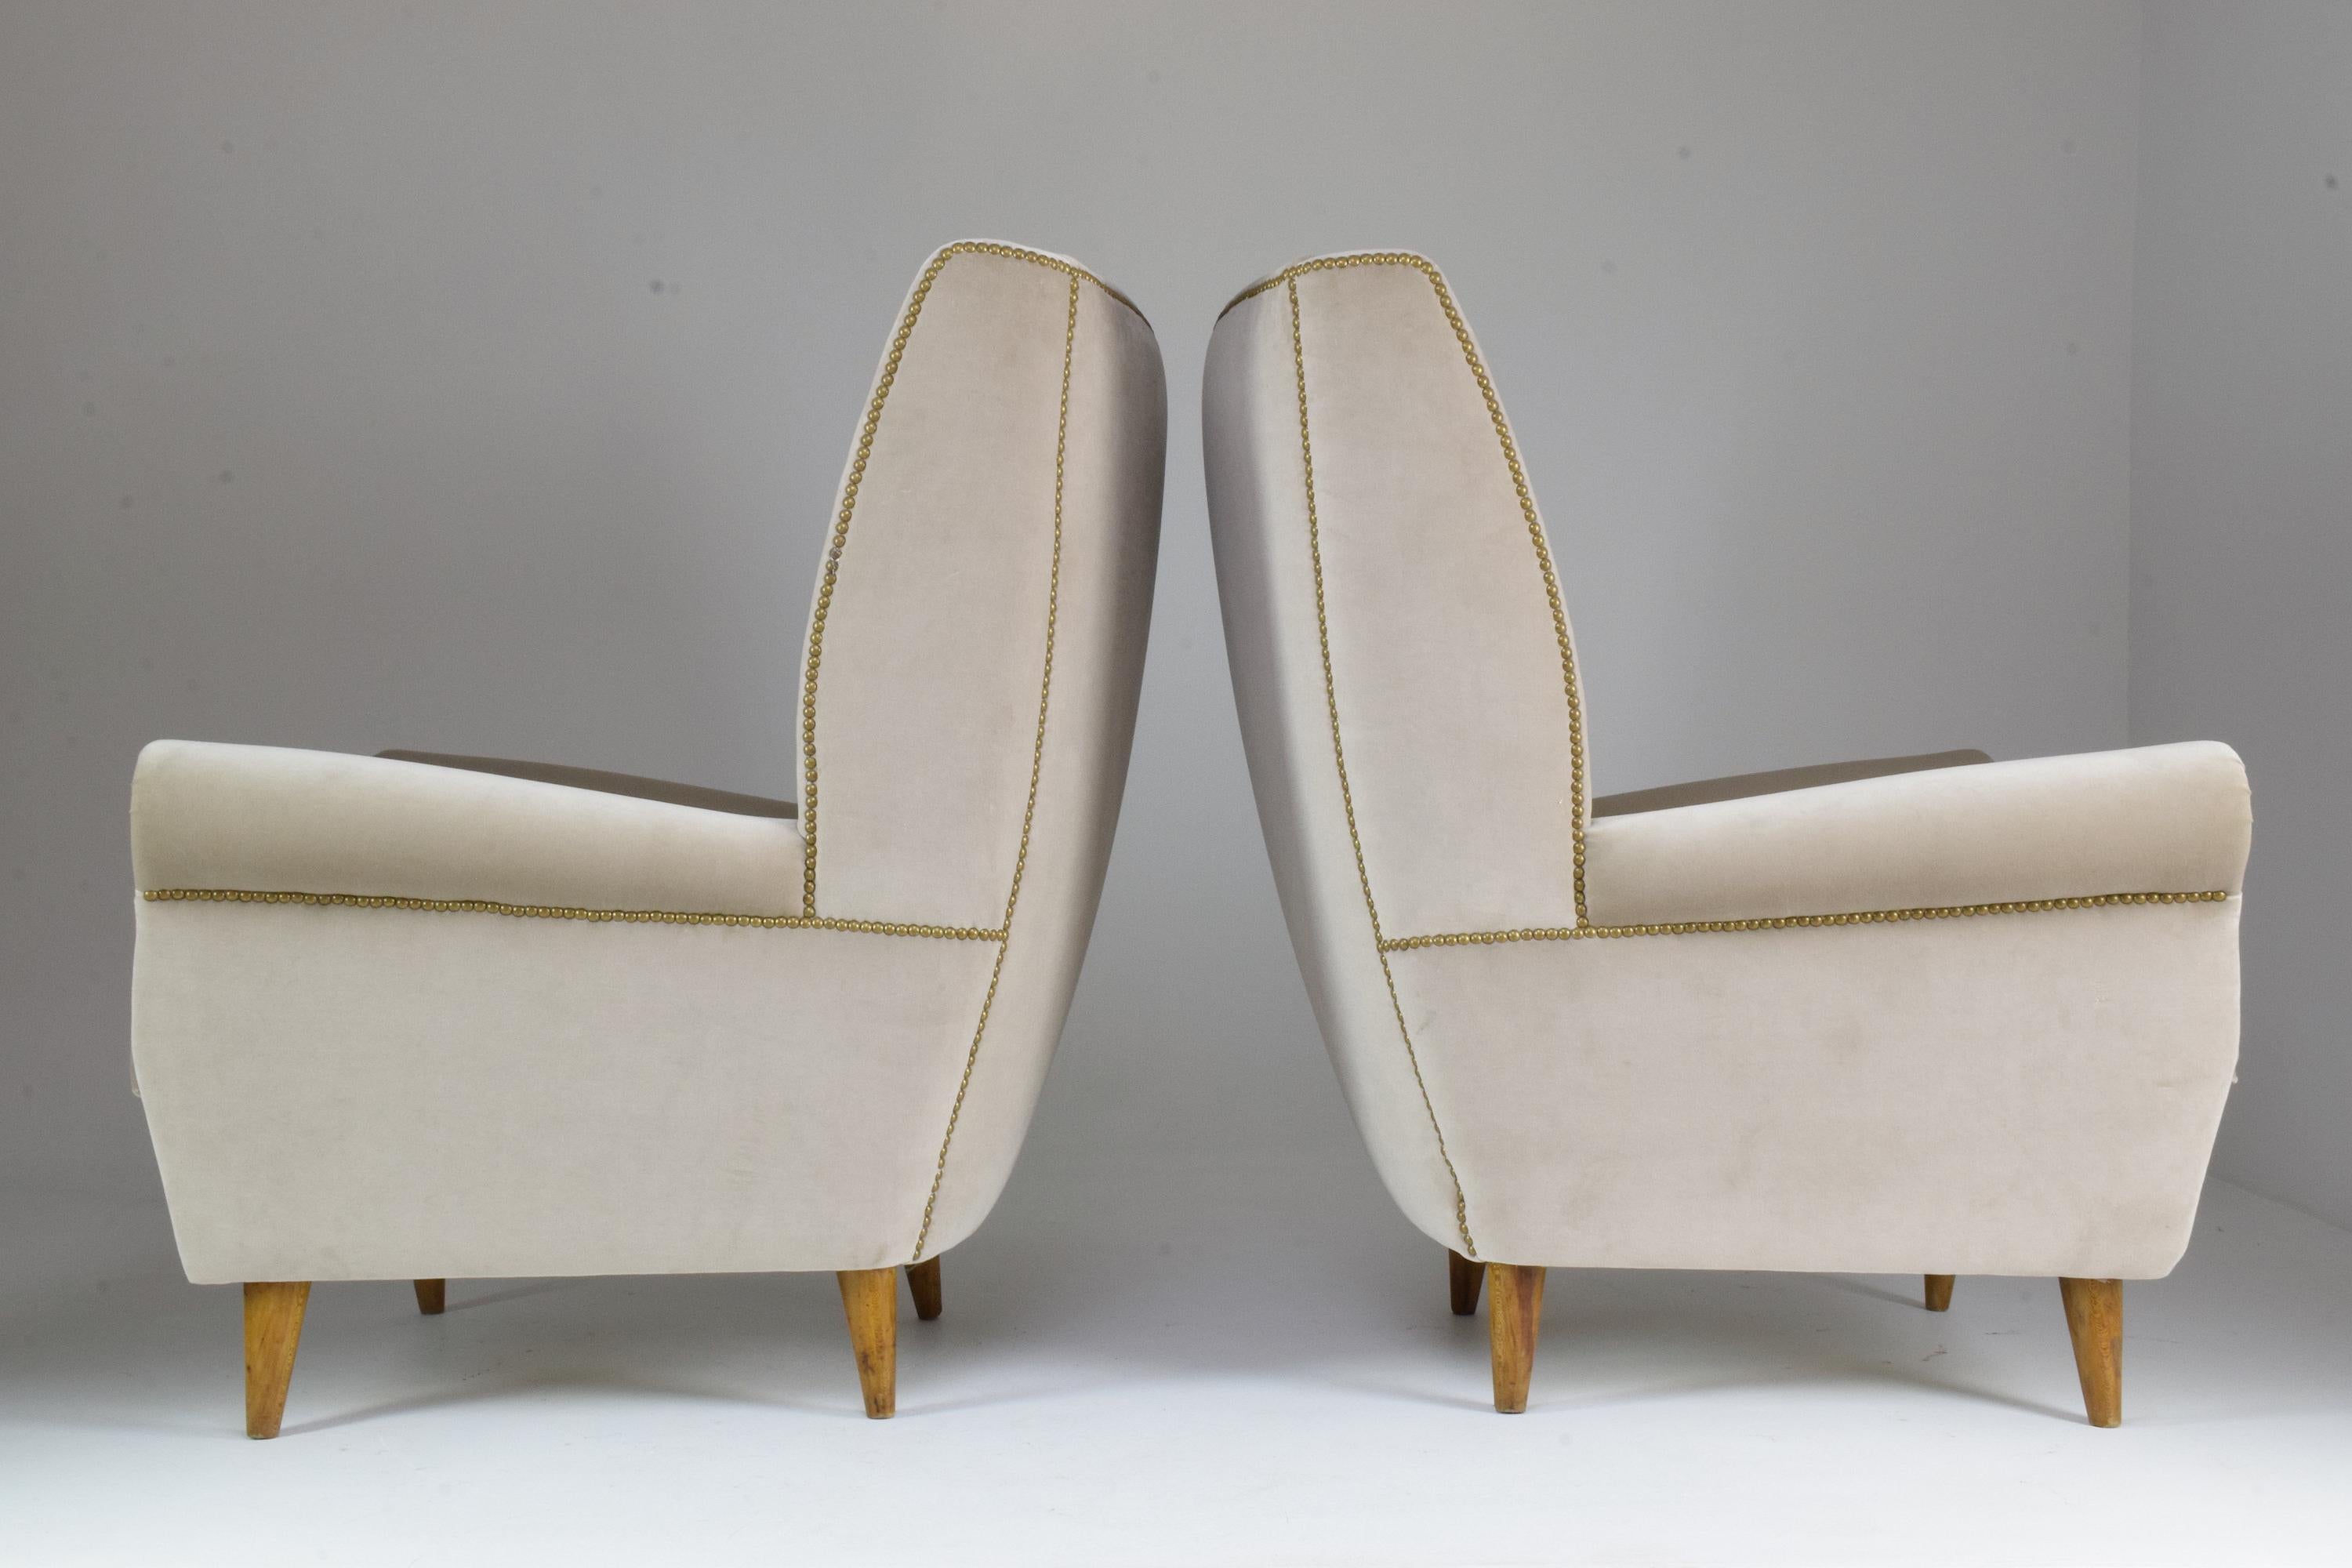 Italian Pair of 20th Century Armchairs by Gio Ponti, 1940s For Sale